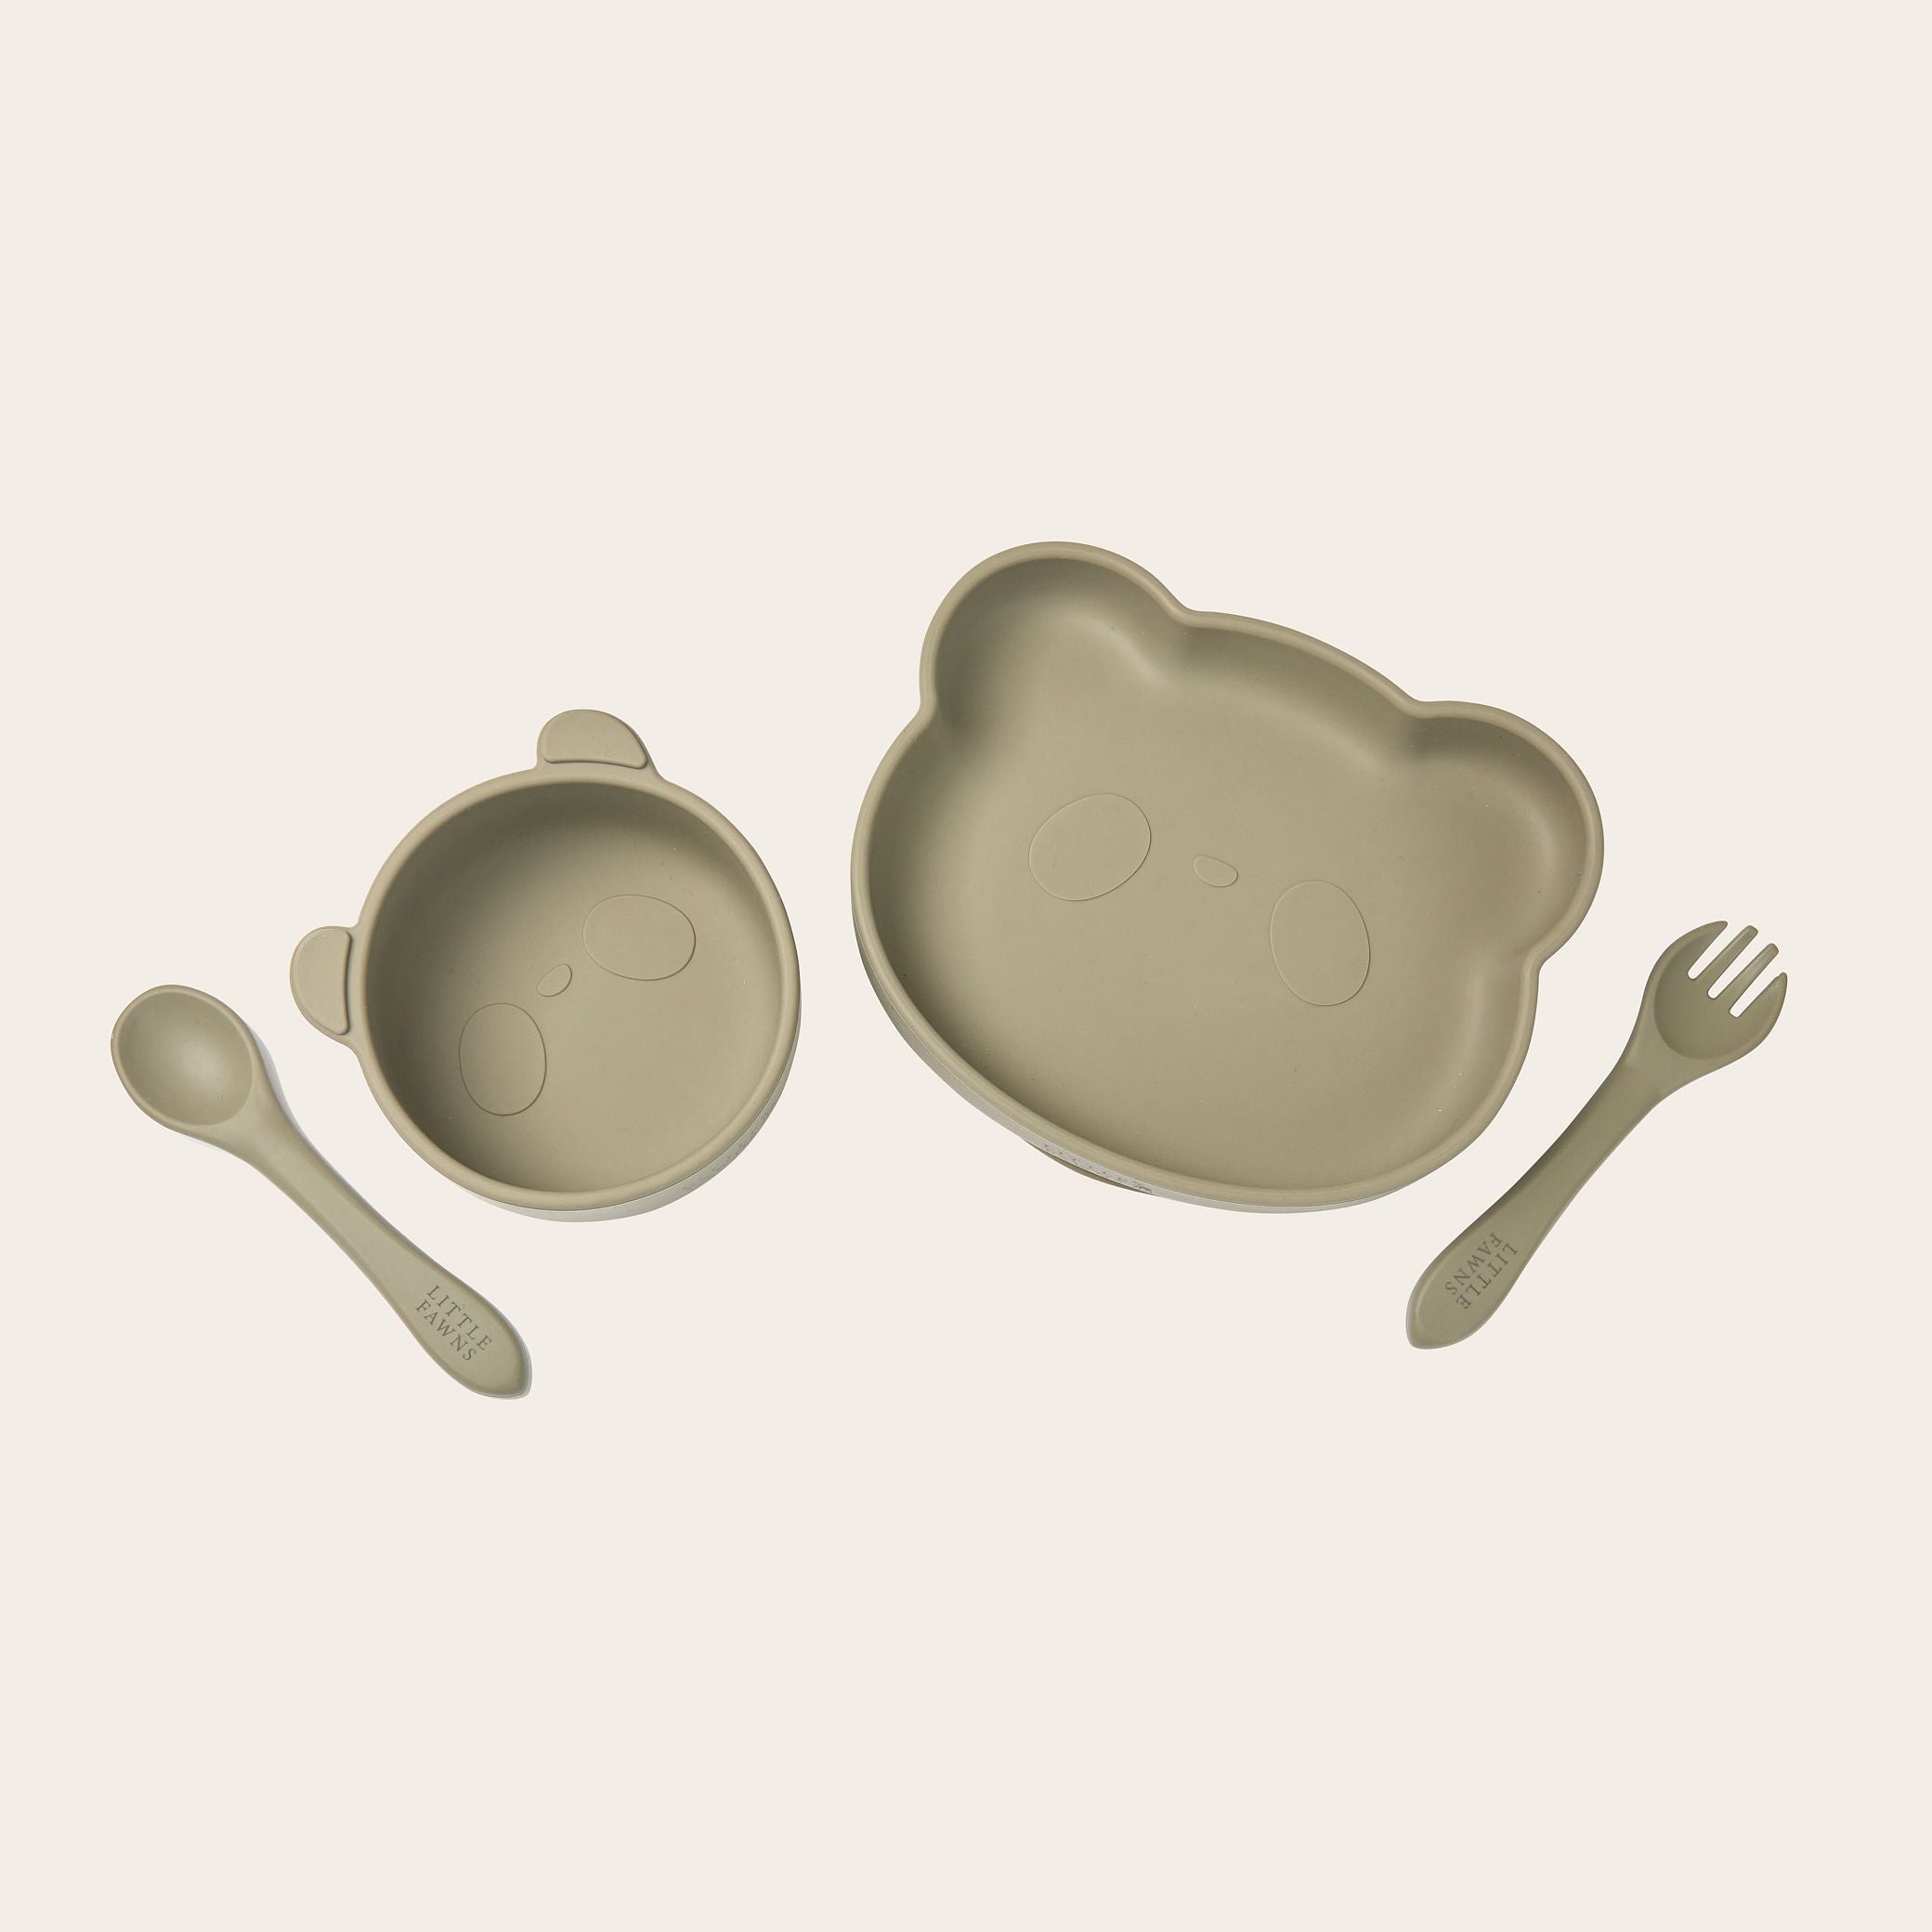 Silicone Suction Panda Bowl & Plate Set in Sage